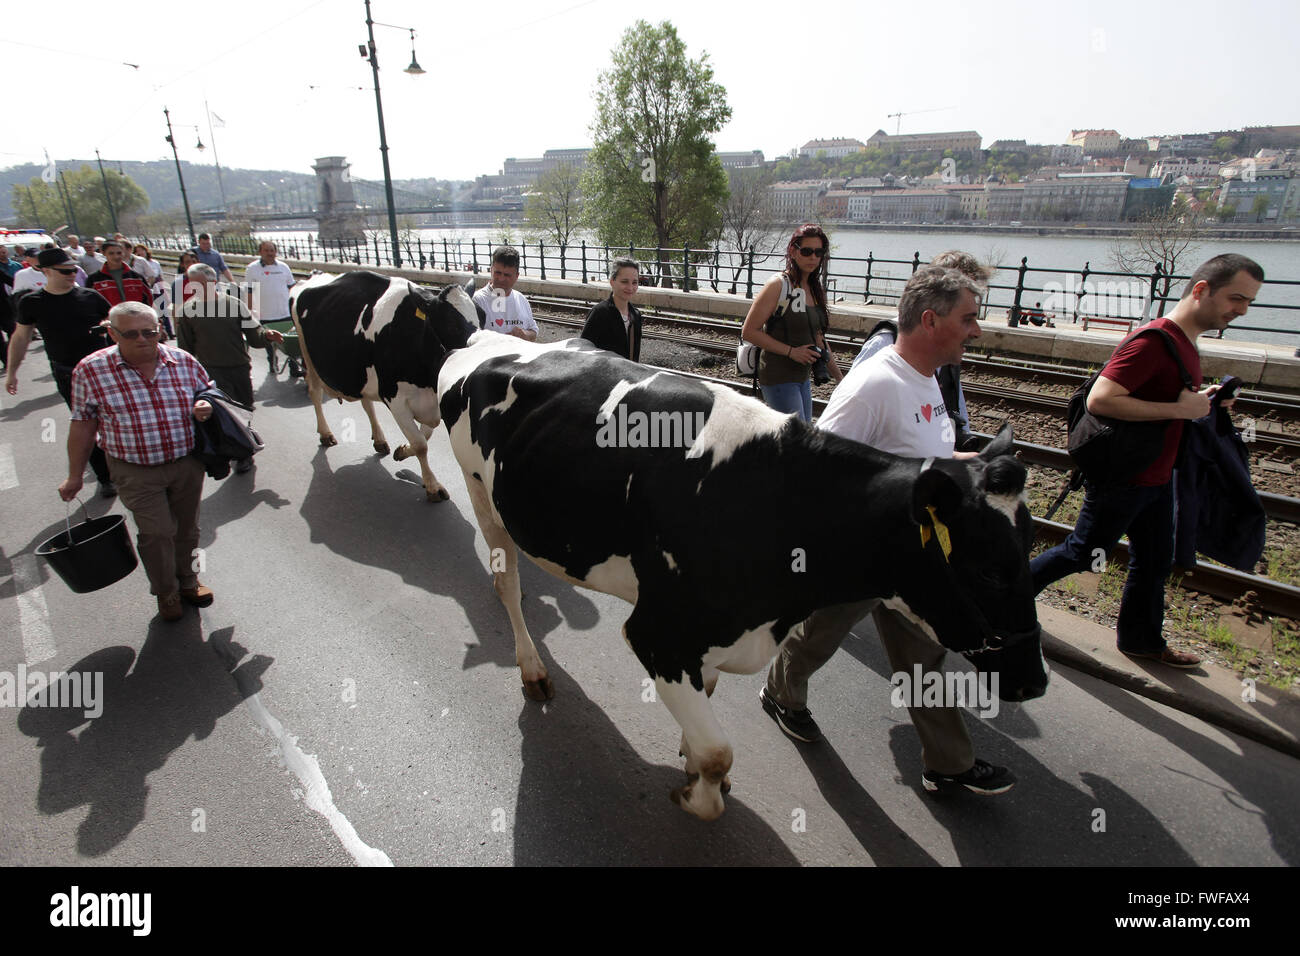 (160405) --BUDAPEST, April 5, 2016 (Xinhua) -- Hungarian dairy farmers marched with their cows on the streets to protest the low milk prices and demand more favorable sales opportunities in Budapest, Hungary, April 4, 2016. (Xinhua/Csaba Domotor) Stock Photo